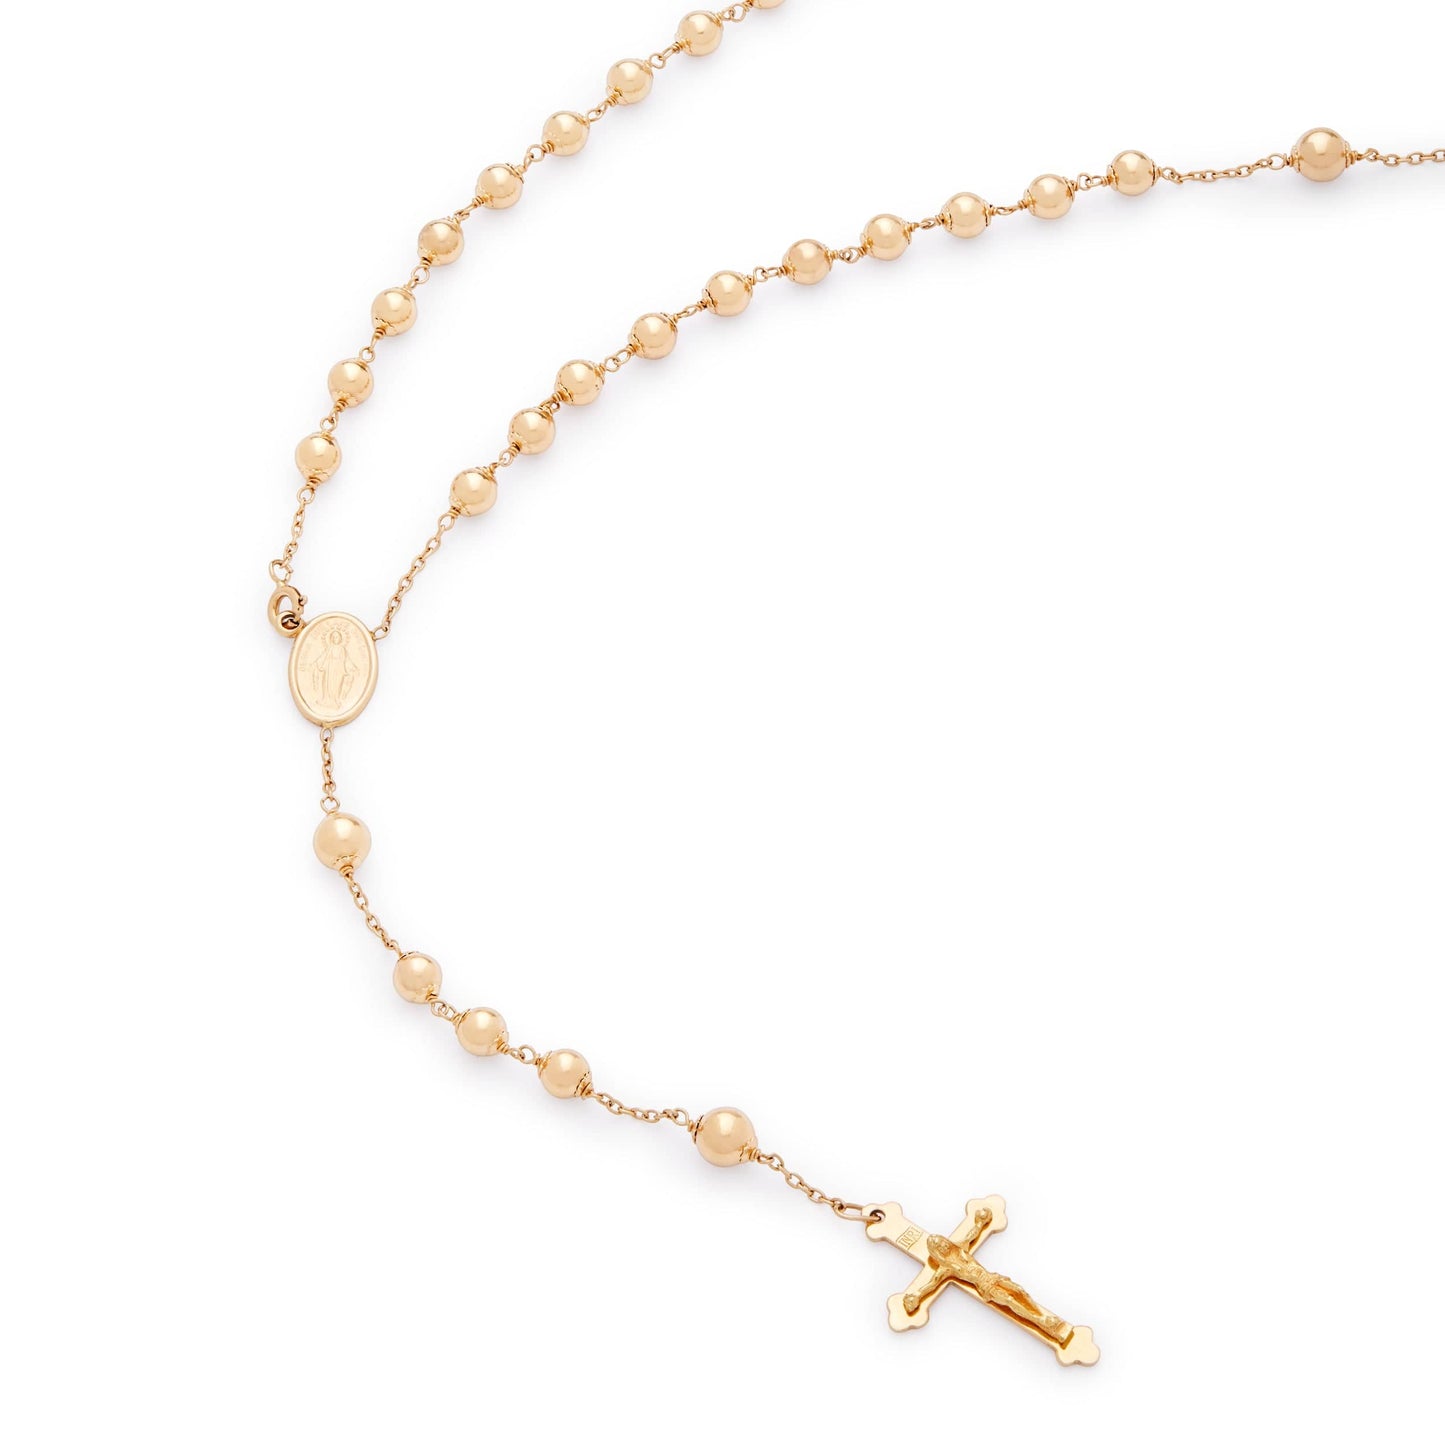 MONDO CATTOLICO Prayer Beads 45 cm (17.7 in) / 5 mm (0.19 in) Yellow Gold Miraculous Mary Rosary